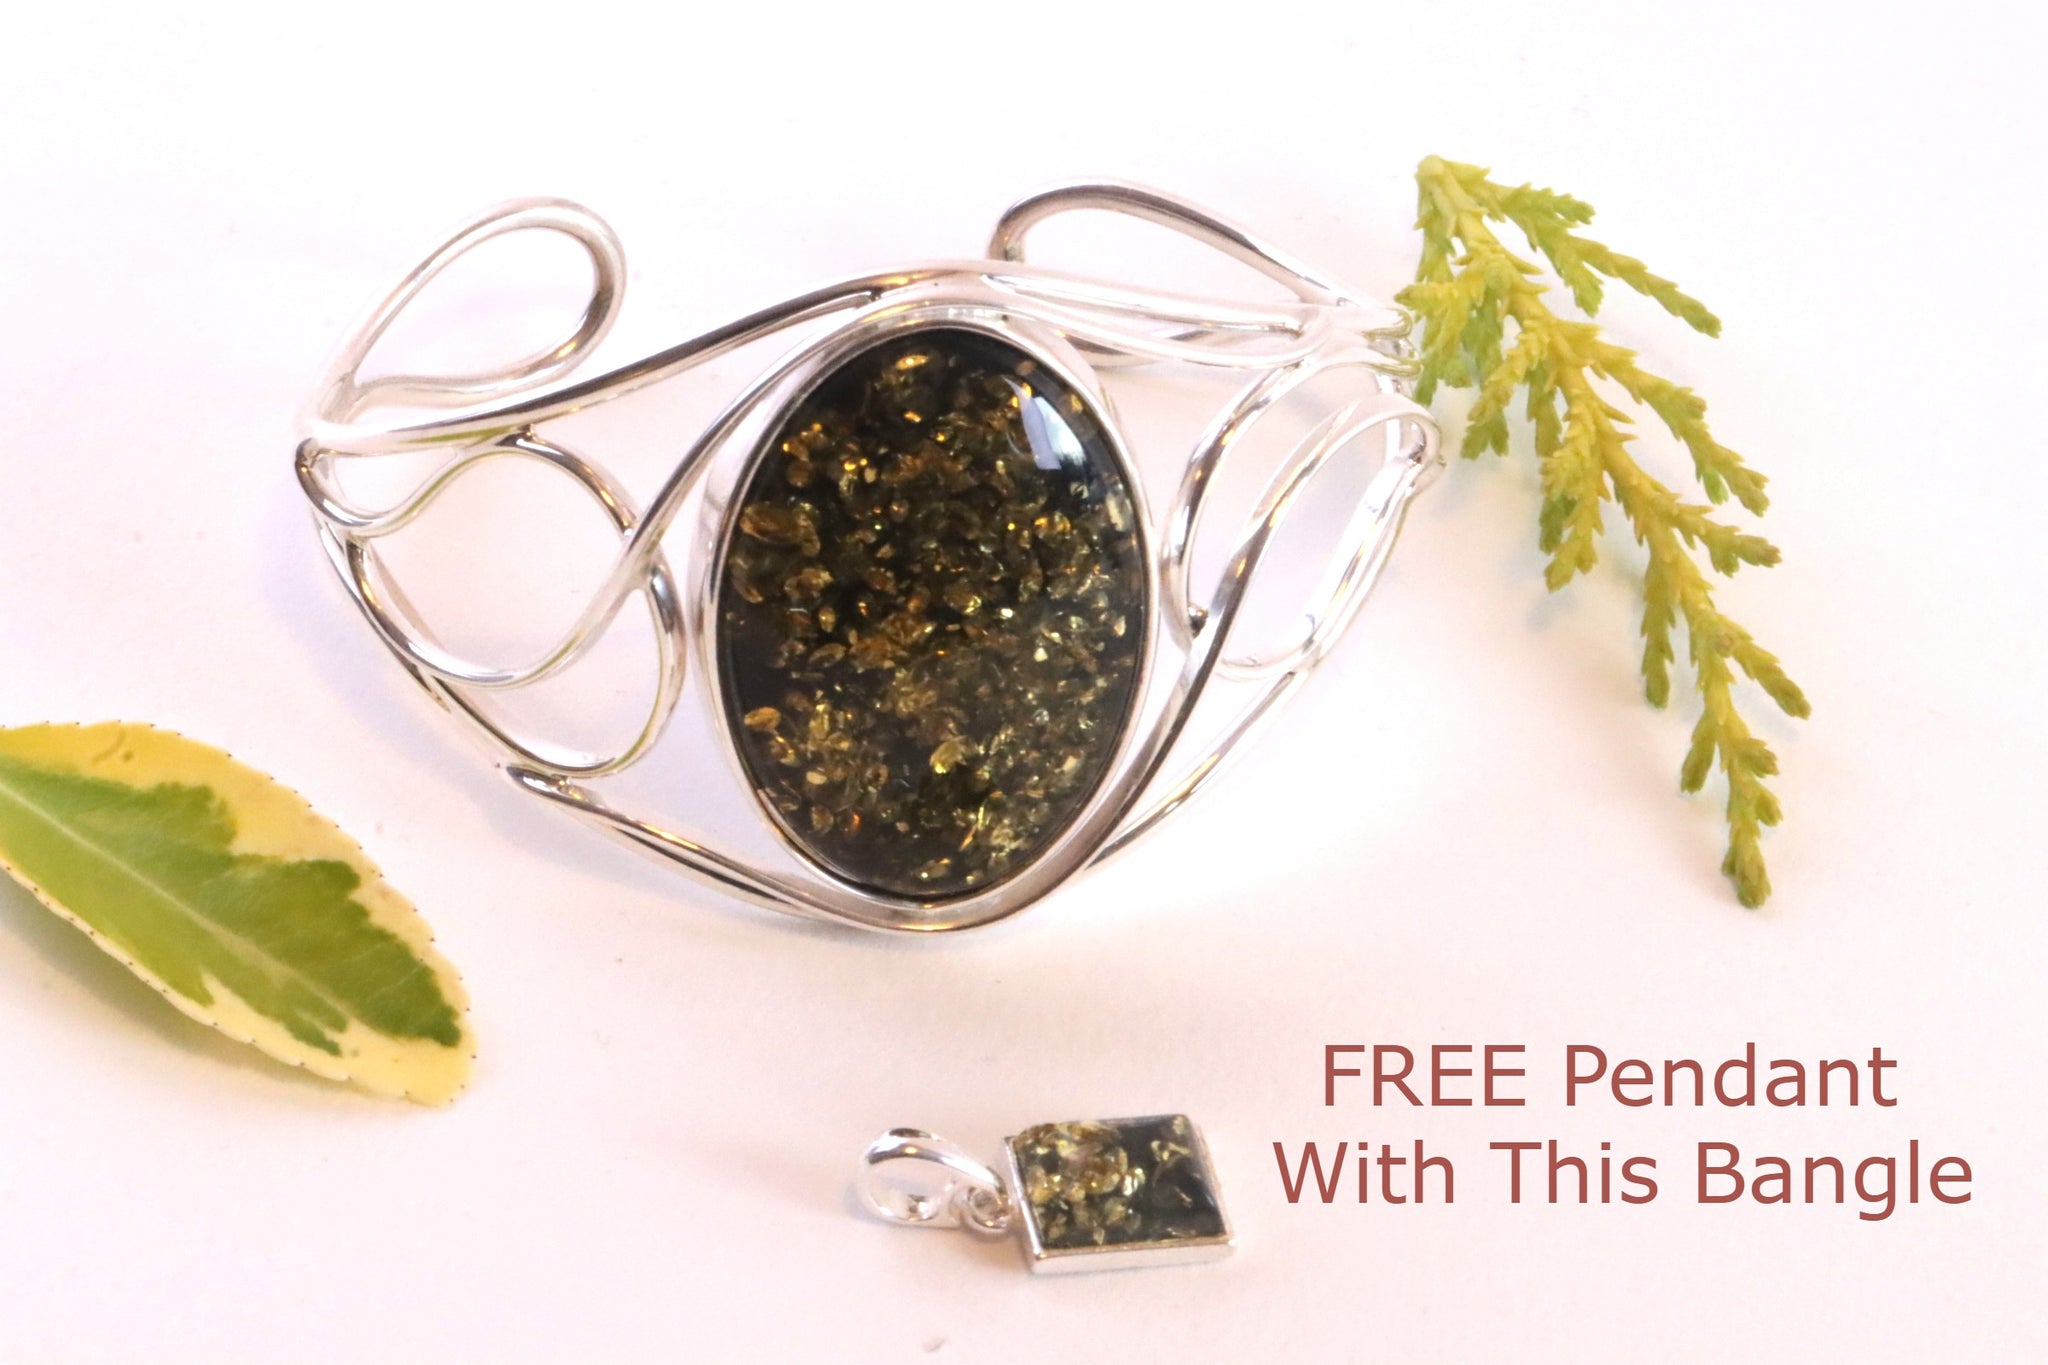 Green Baltic Amber Bangle With FREE Pendant on 925 Sterling Silver